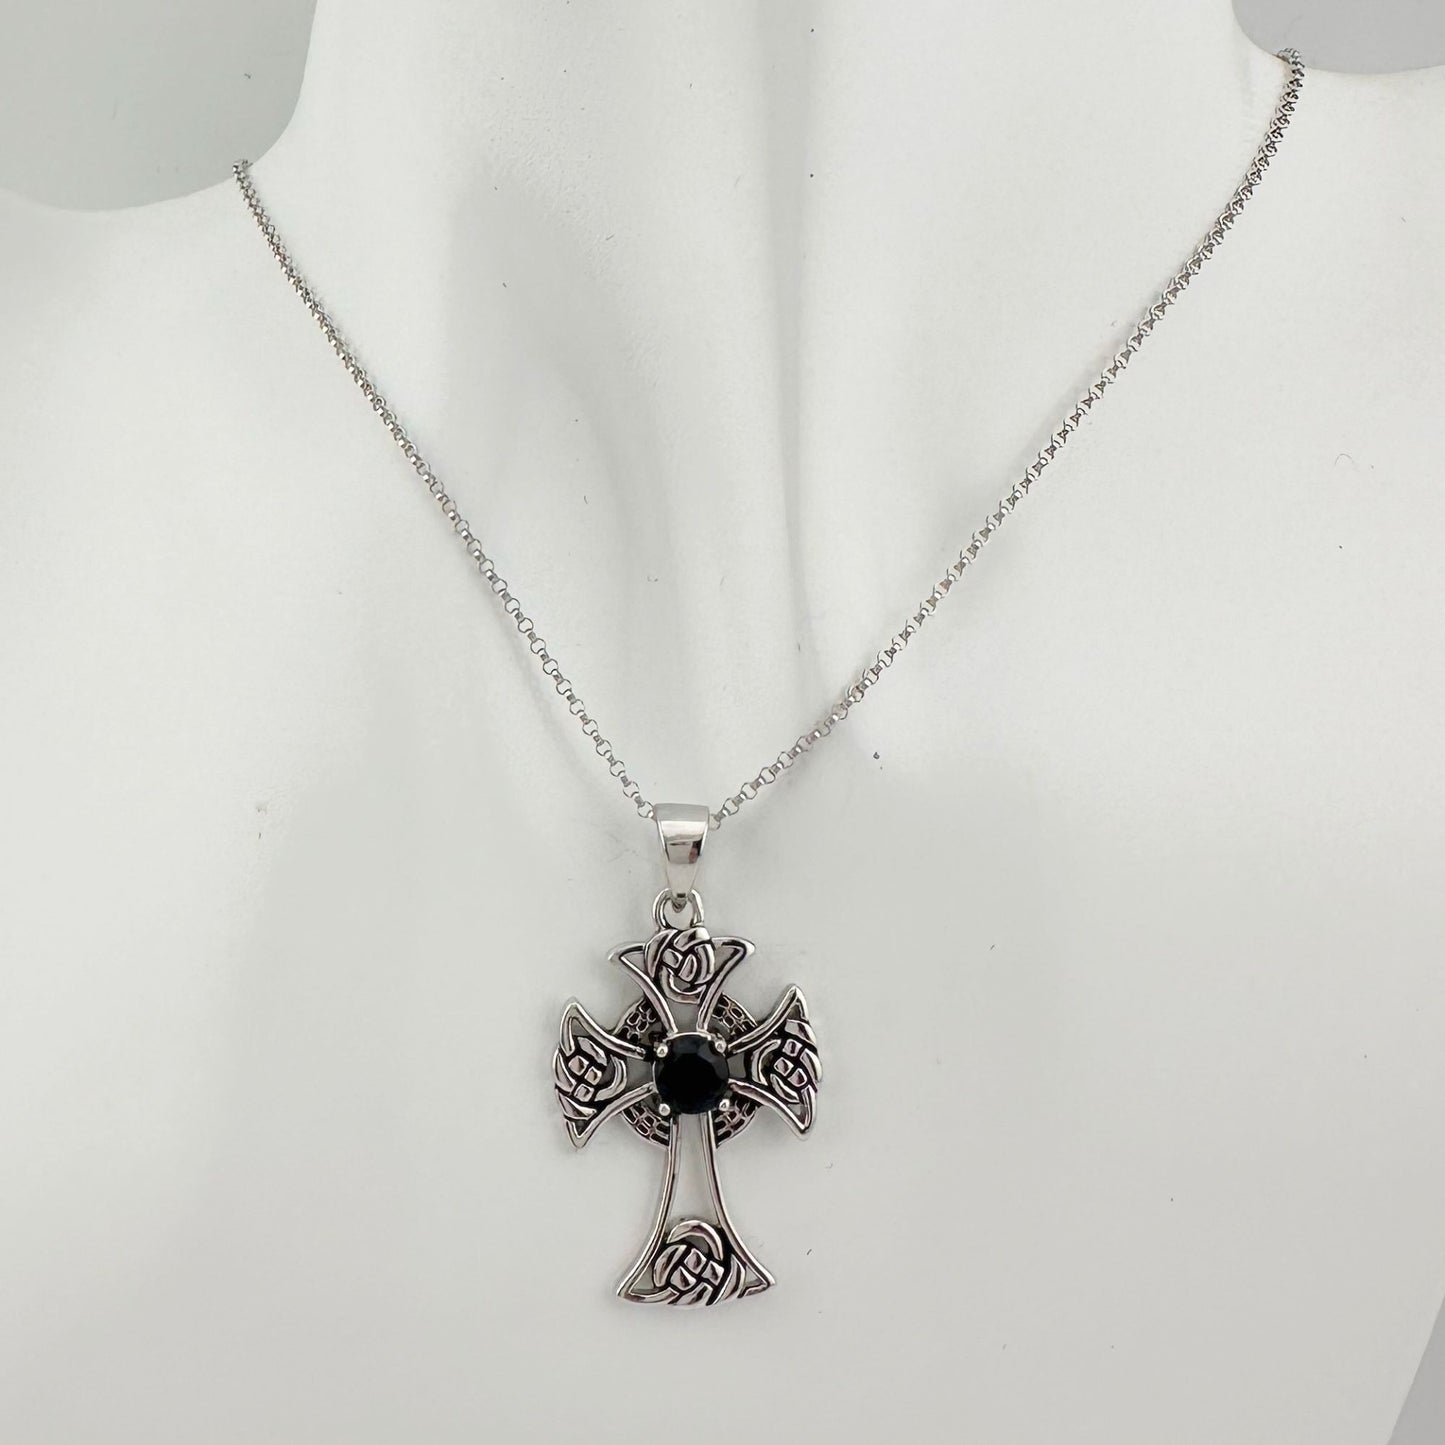 Bold Celtic Cross with Black Sapphire Center - Sterling Silver with 18" Chain